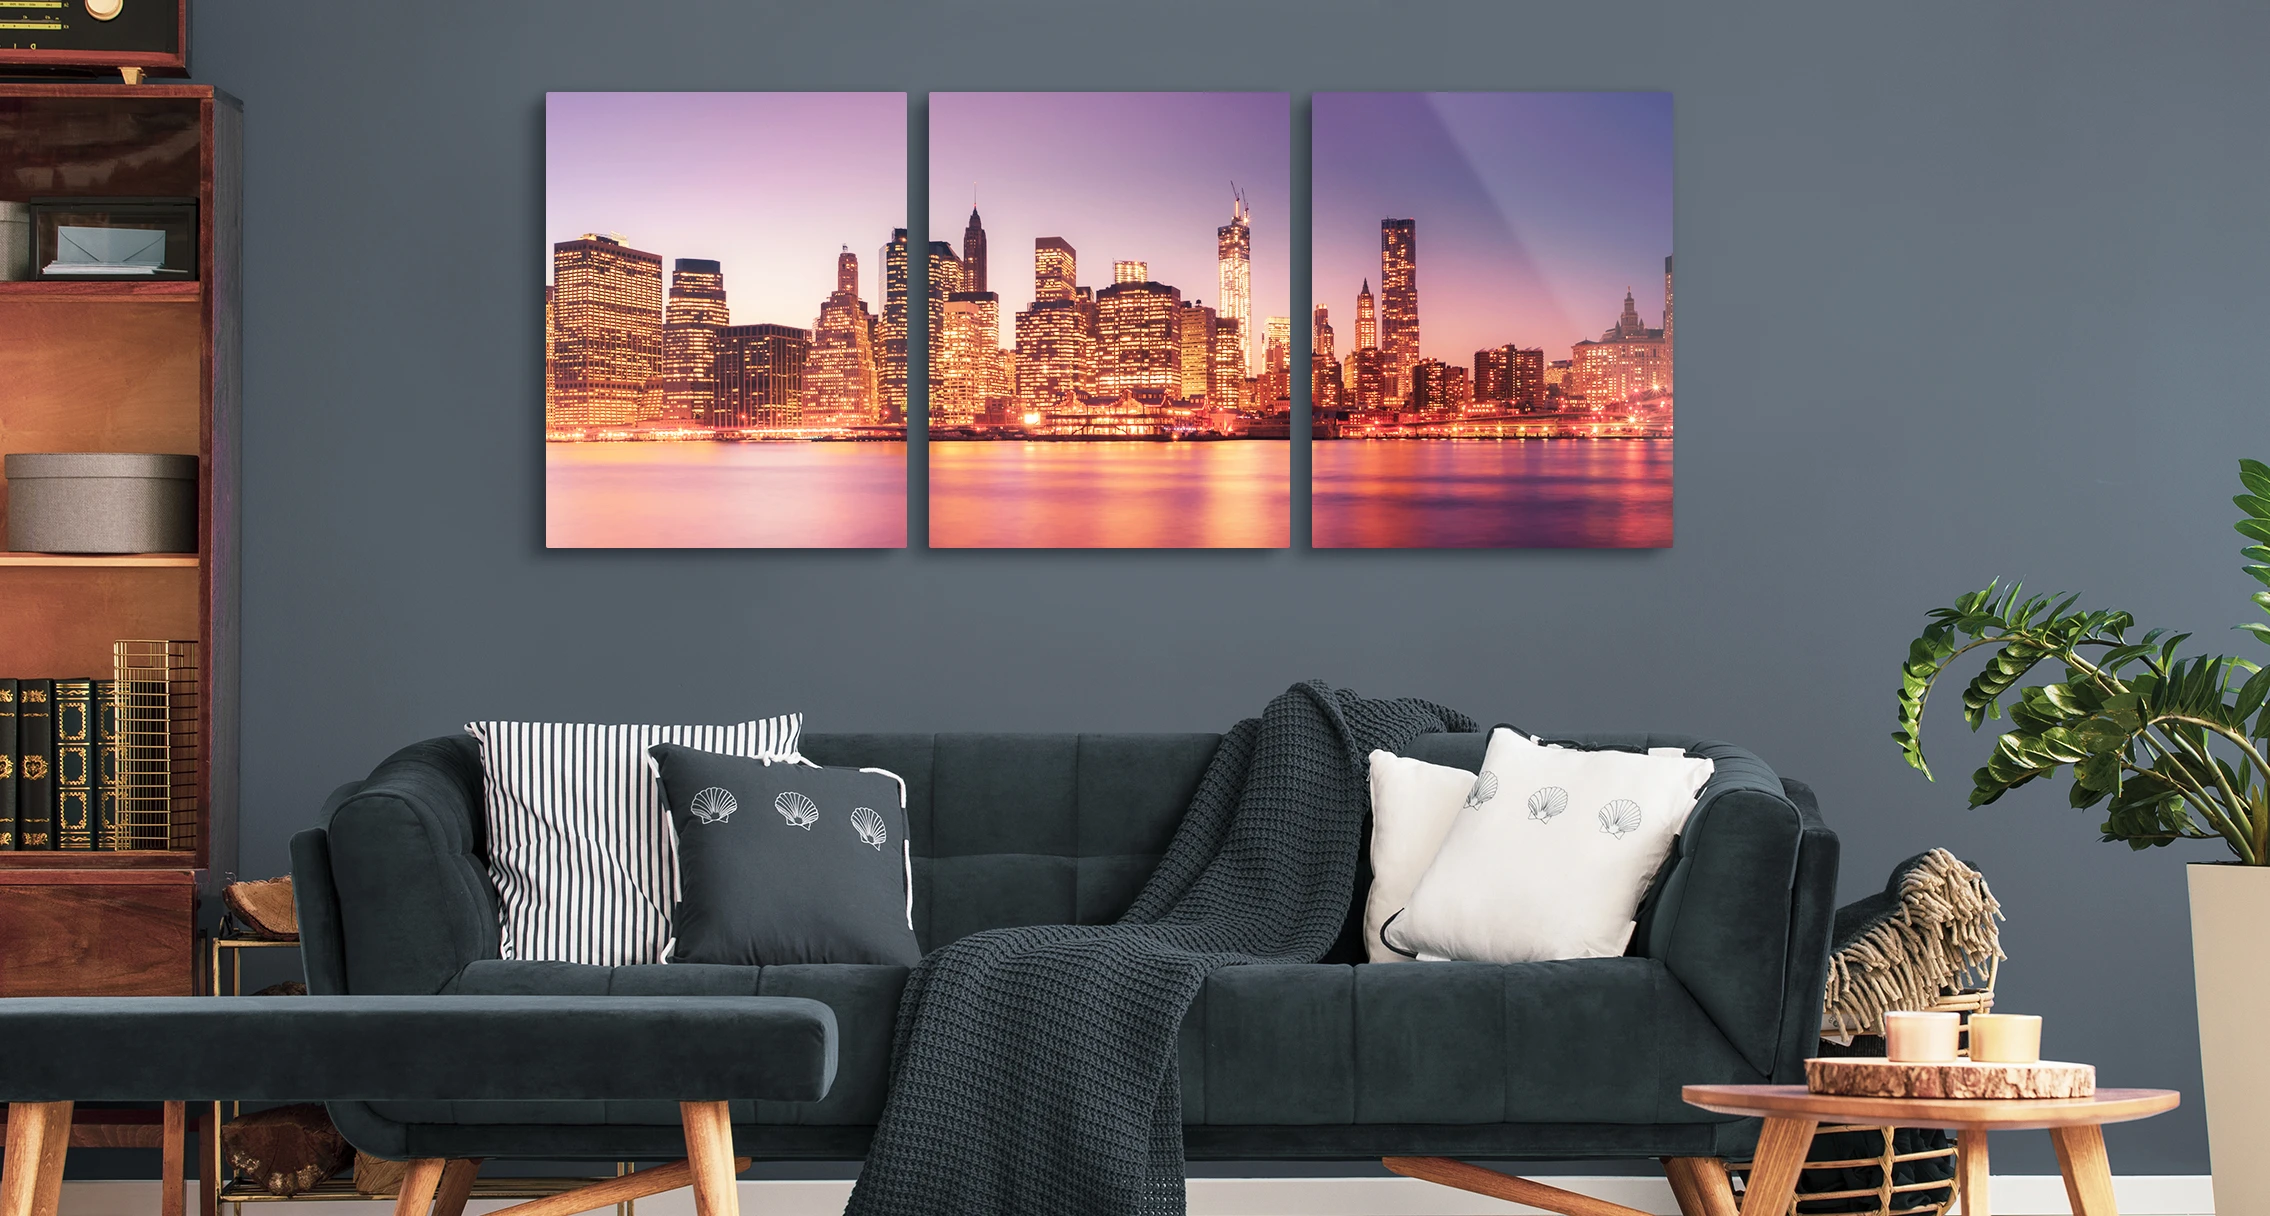 An evening long exposure of a skyline. The whole picture is divided into three parts that hang horizontally on the wall. 